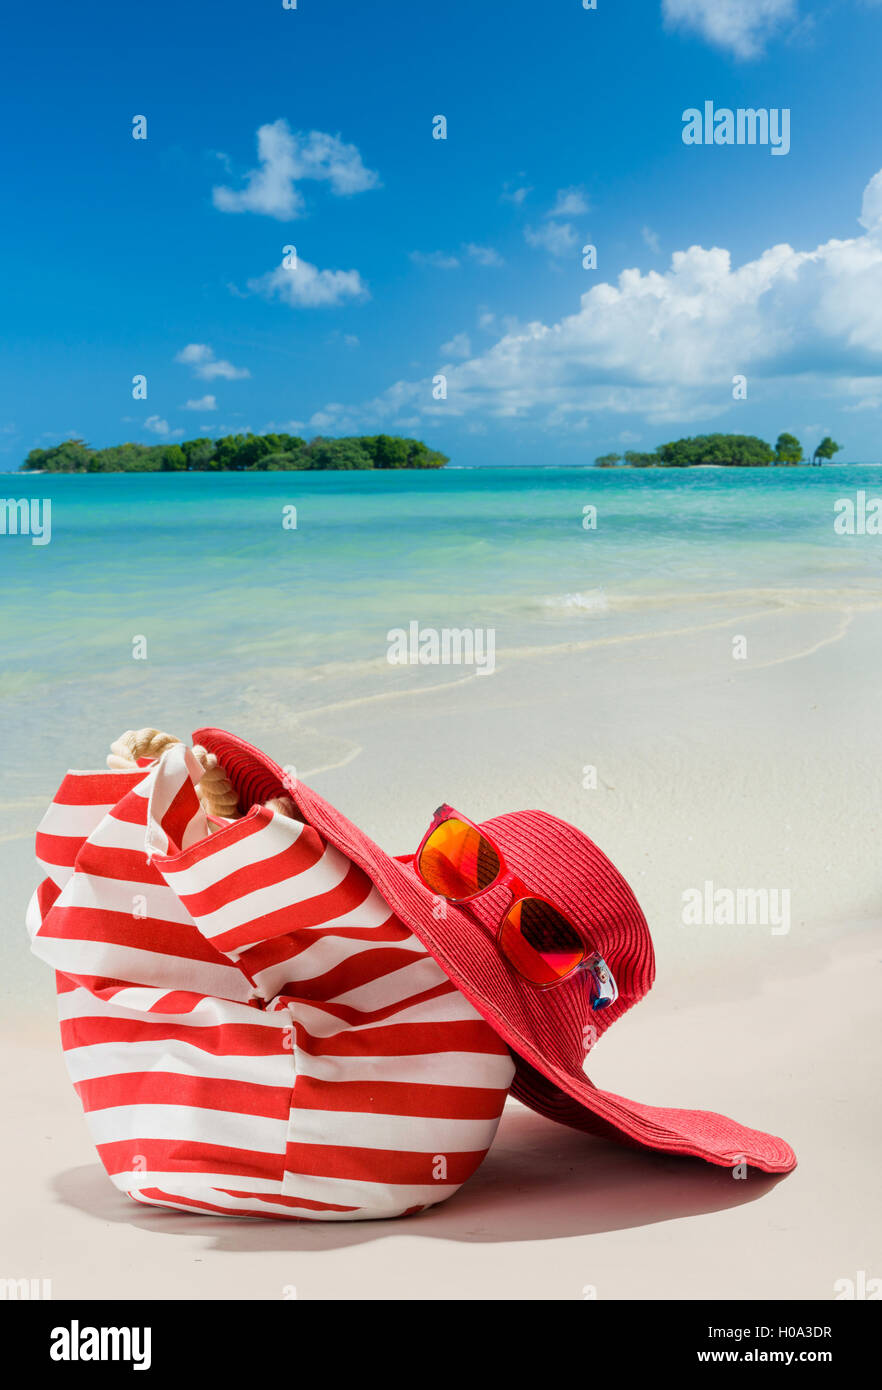 Summer beach bag with red  straw hat and sunglasses on sandy beach Stock Photo